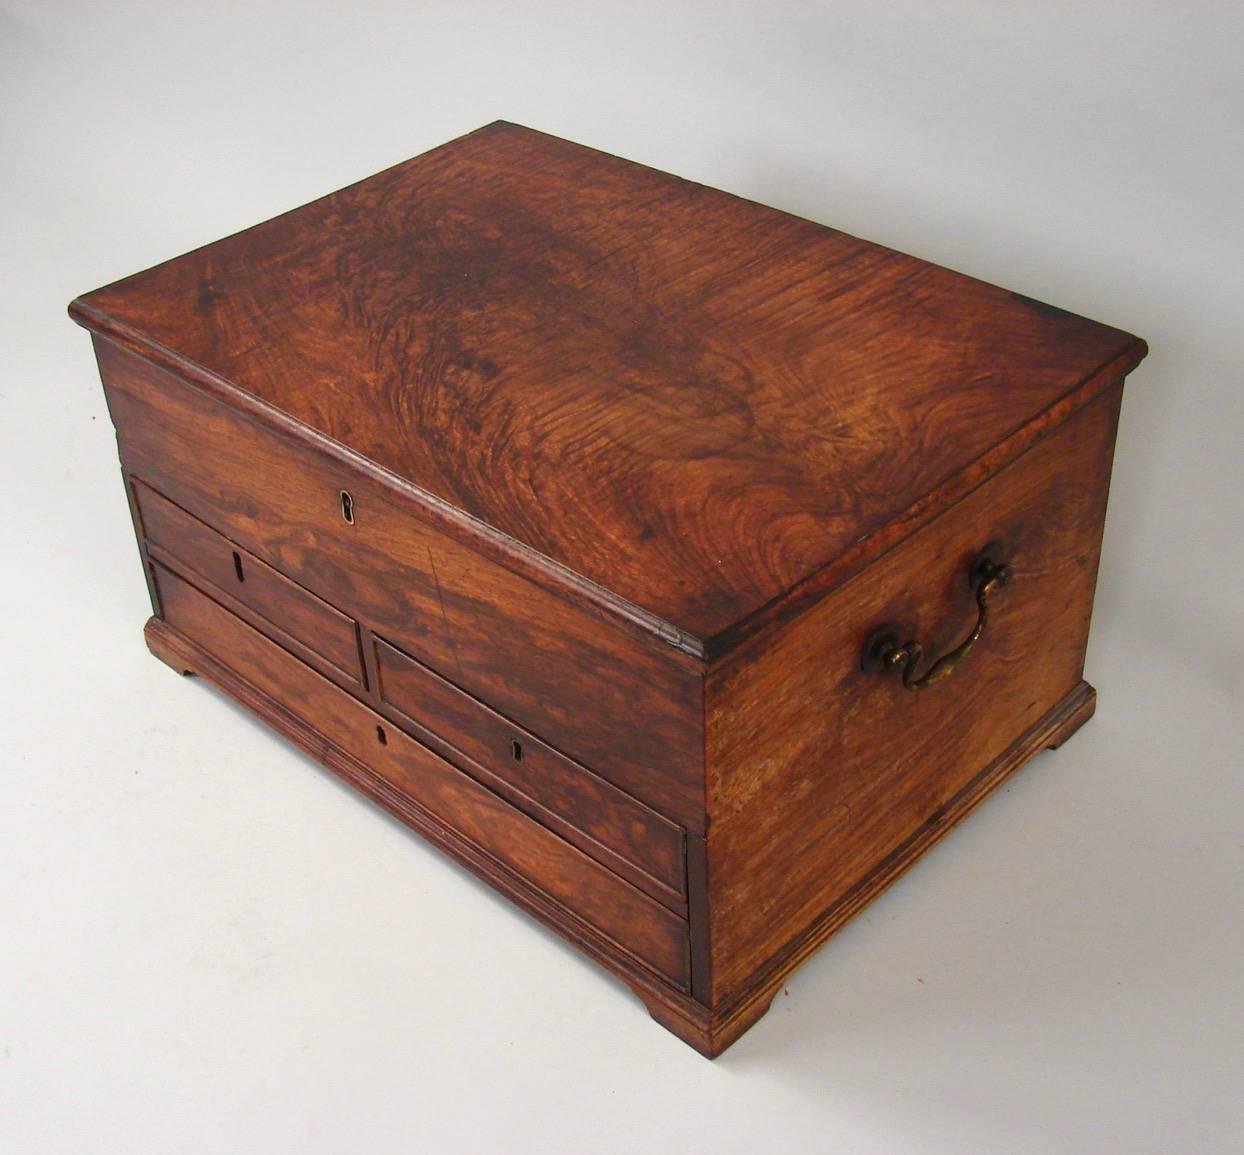 A beautifully crafted Anglo-Indian hardwood chest, the interior fitted with compartments, the exterior with two short over one long drawer, all resting on small bracket feet, circa 1840-1860.